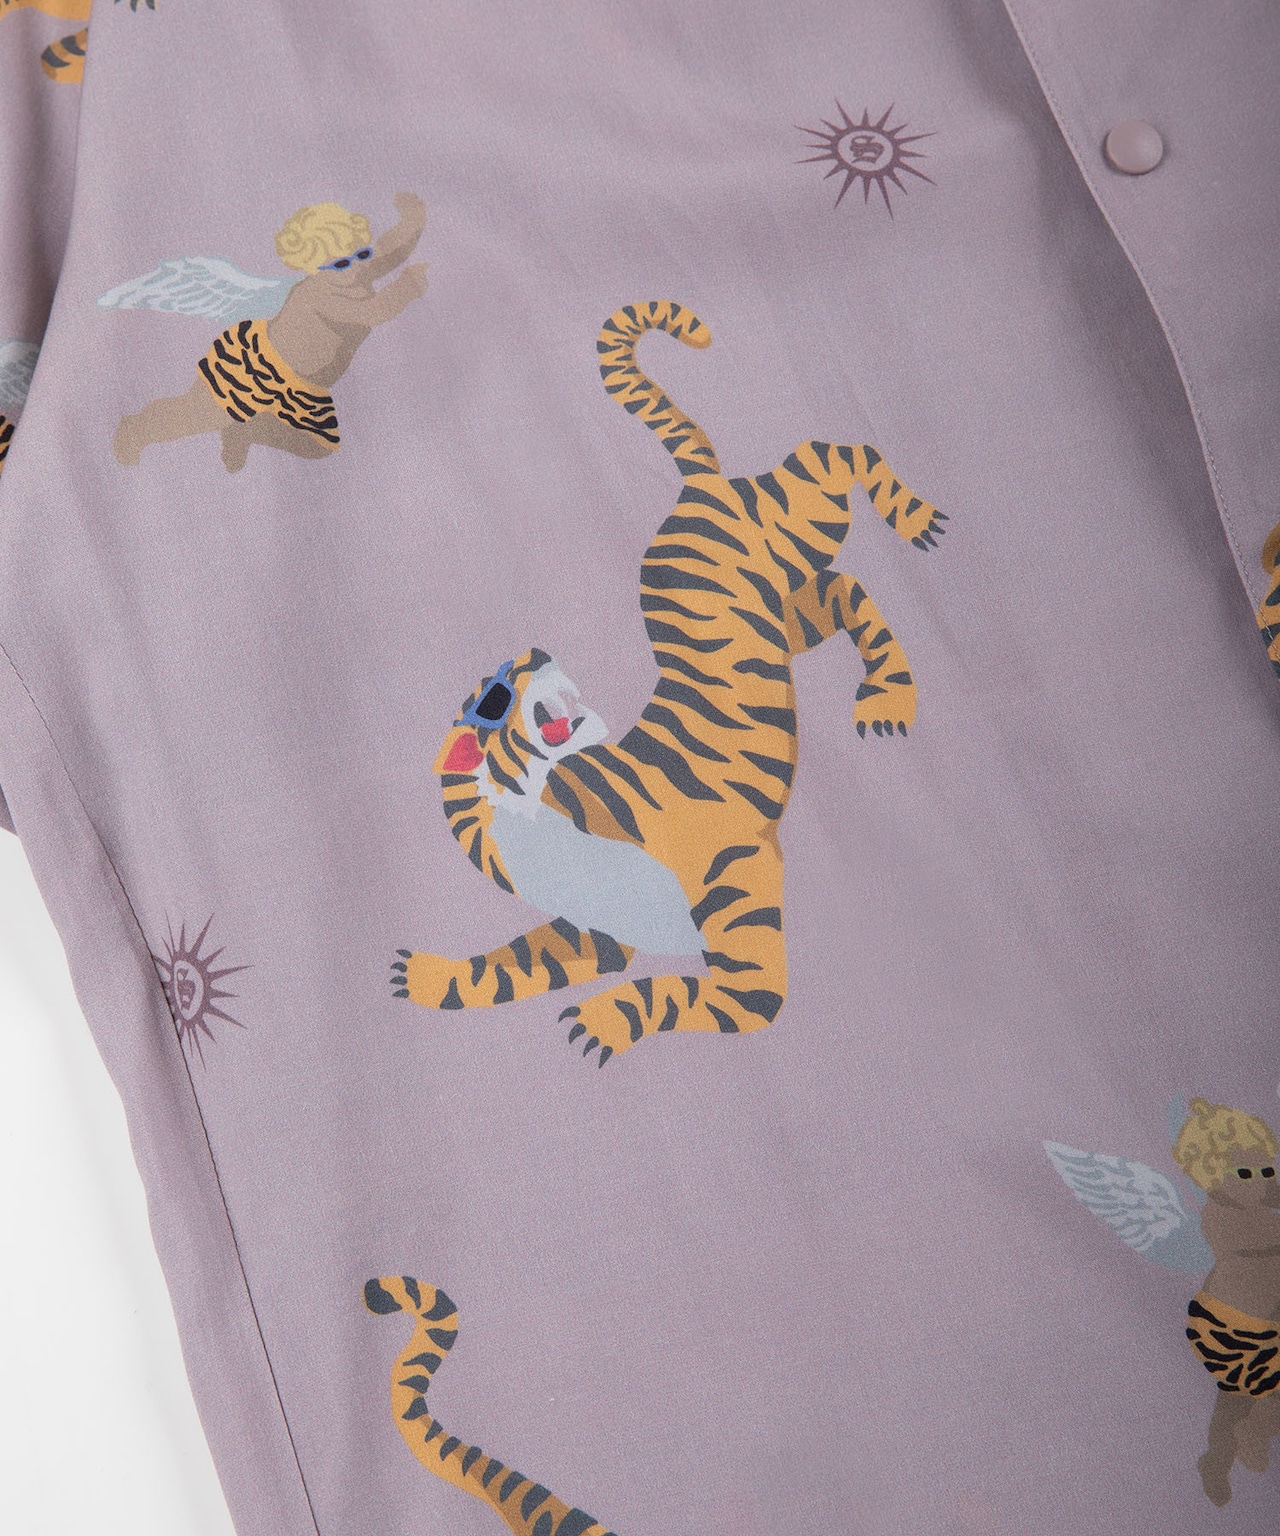 【SUNS】TIGER&ANGEL OPEN COLOR SHIRTS［RSS015］